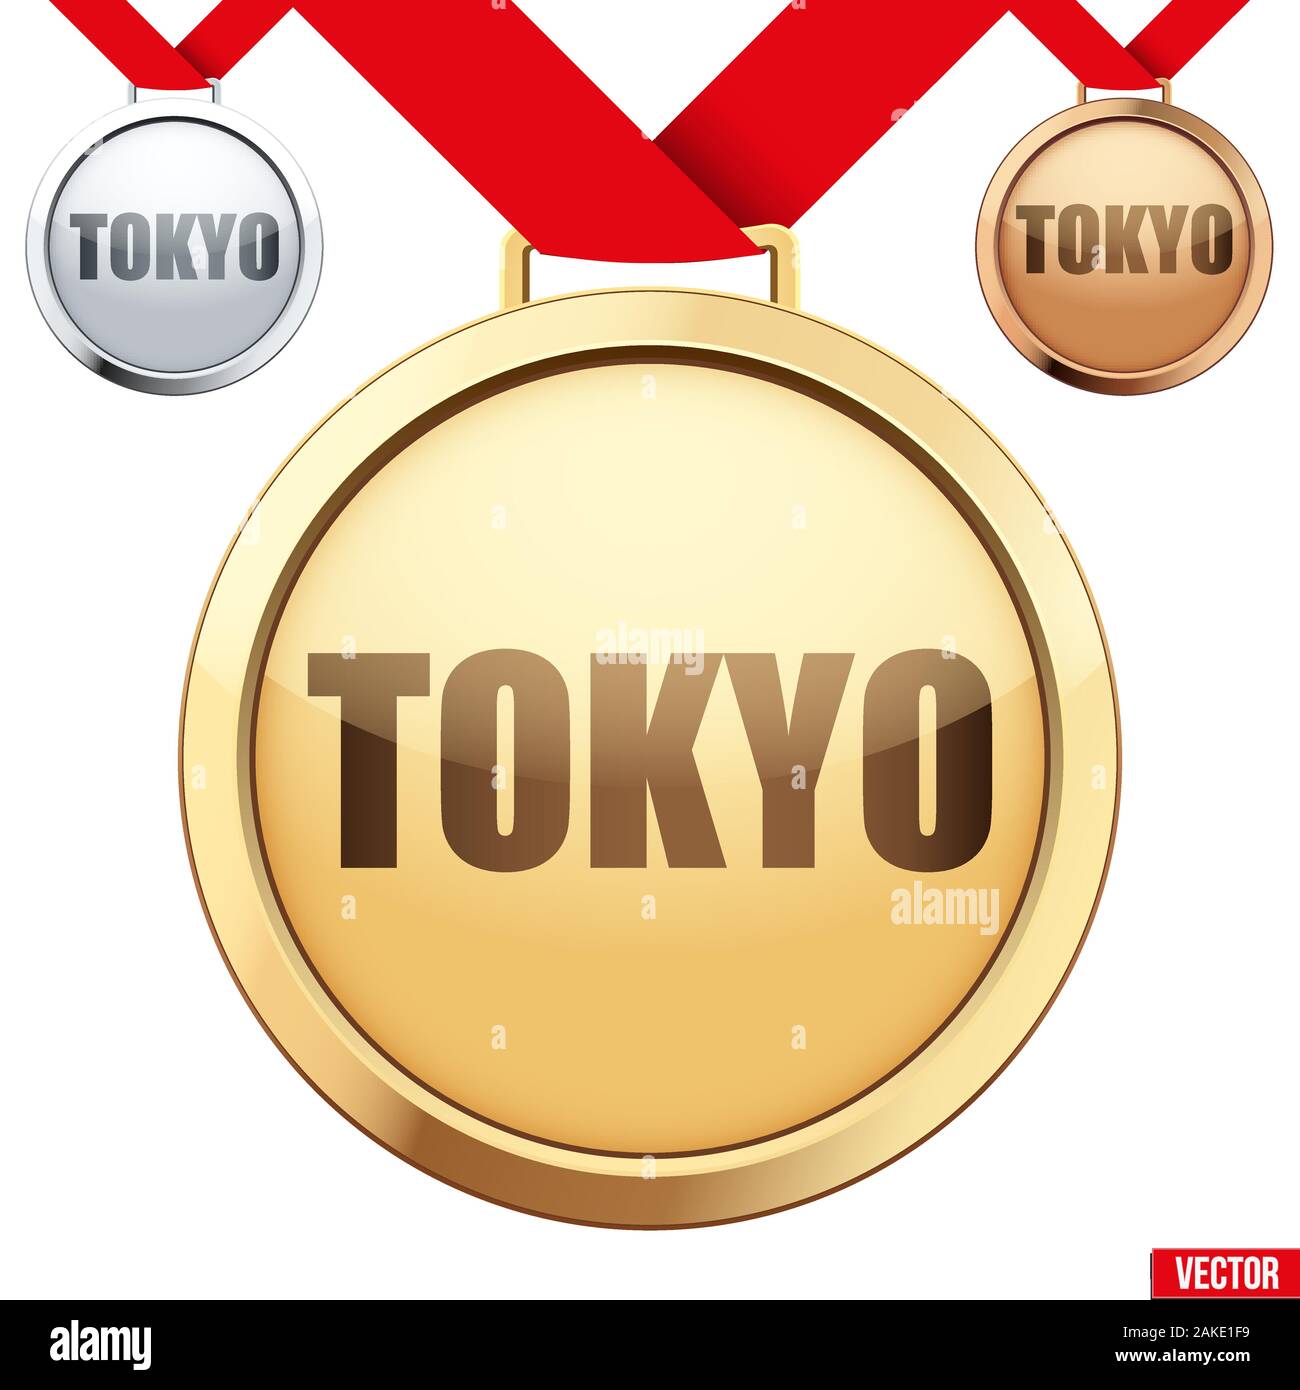 Set of medals with text Tokyo Stock Vector